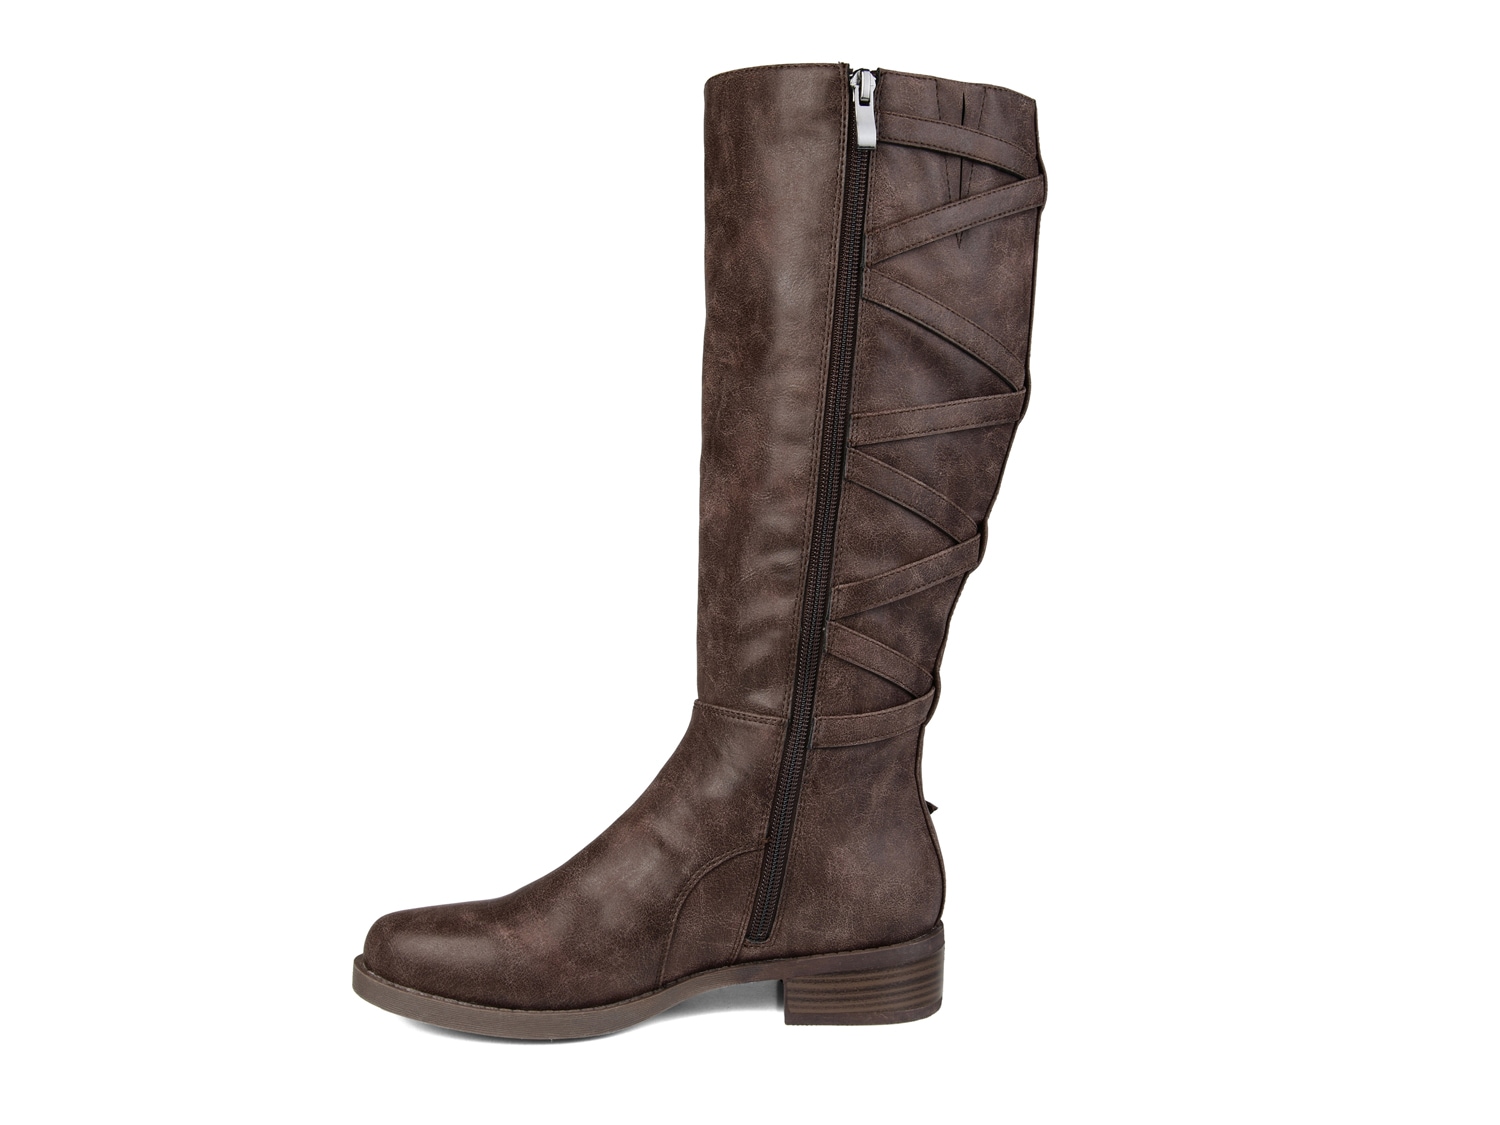 Journee Collection Carly Boot | DSW